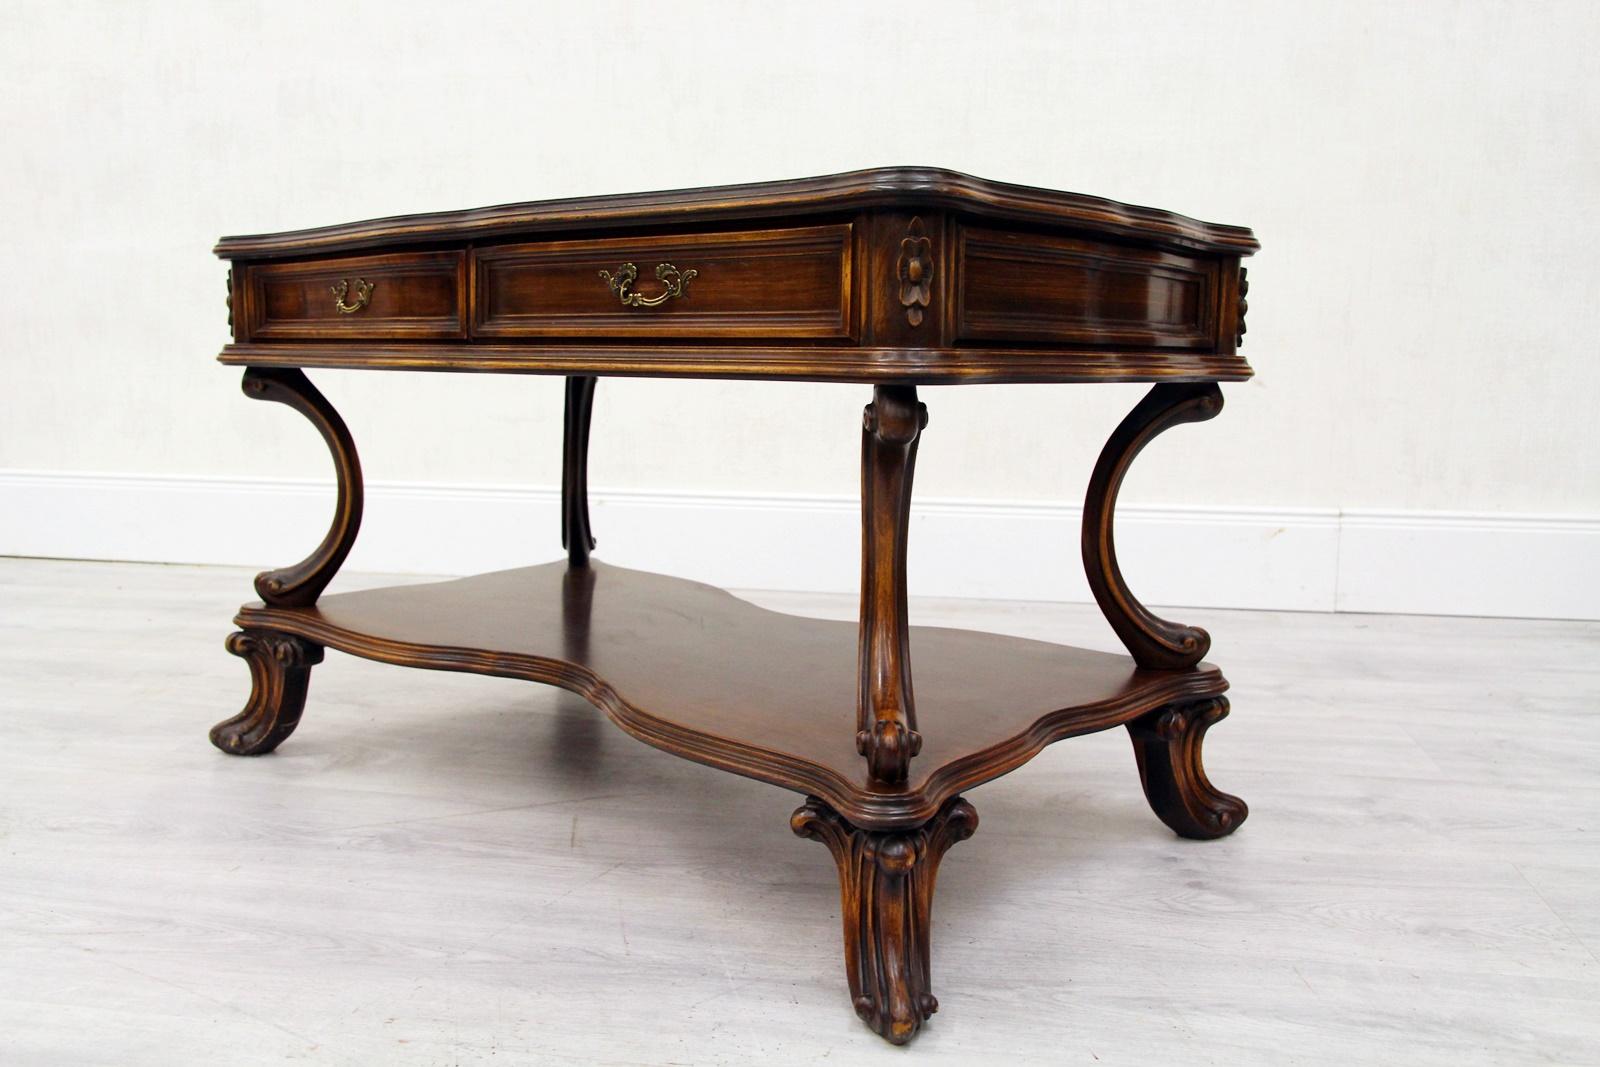 Condition: The table is in good condition according to the age and still has the charm of the 